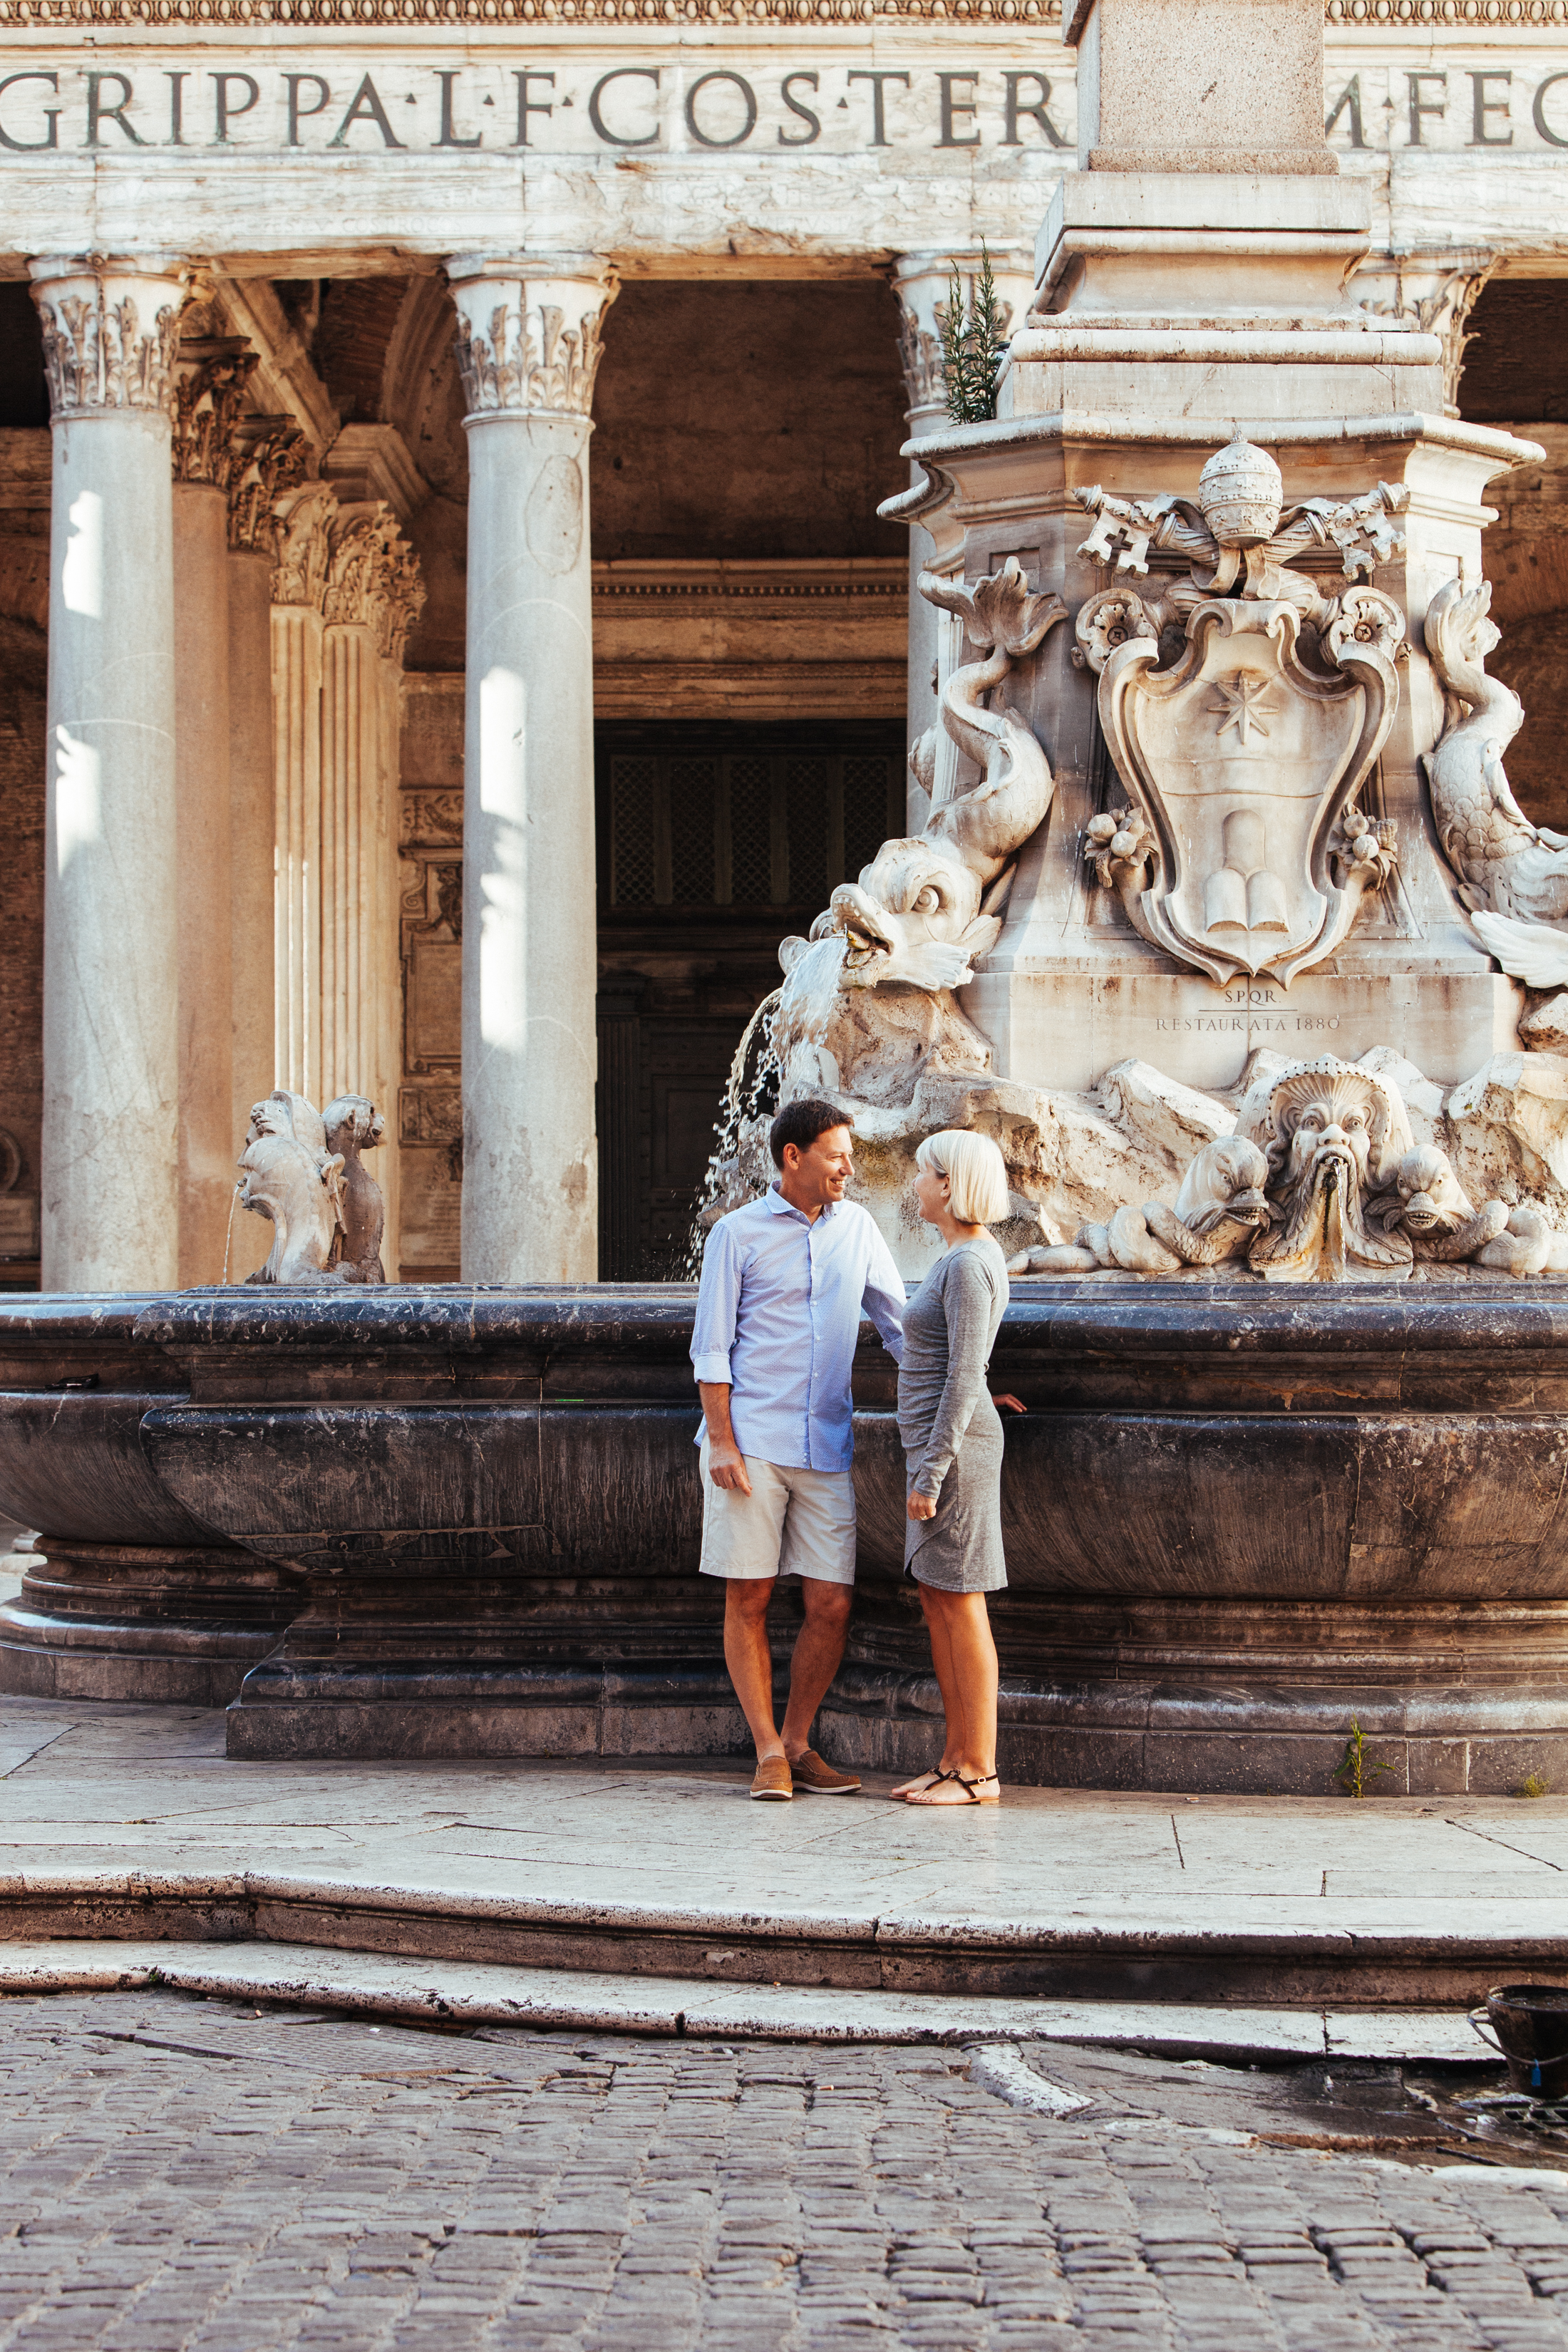  Flytographer:  Guido in Rome  